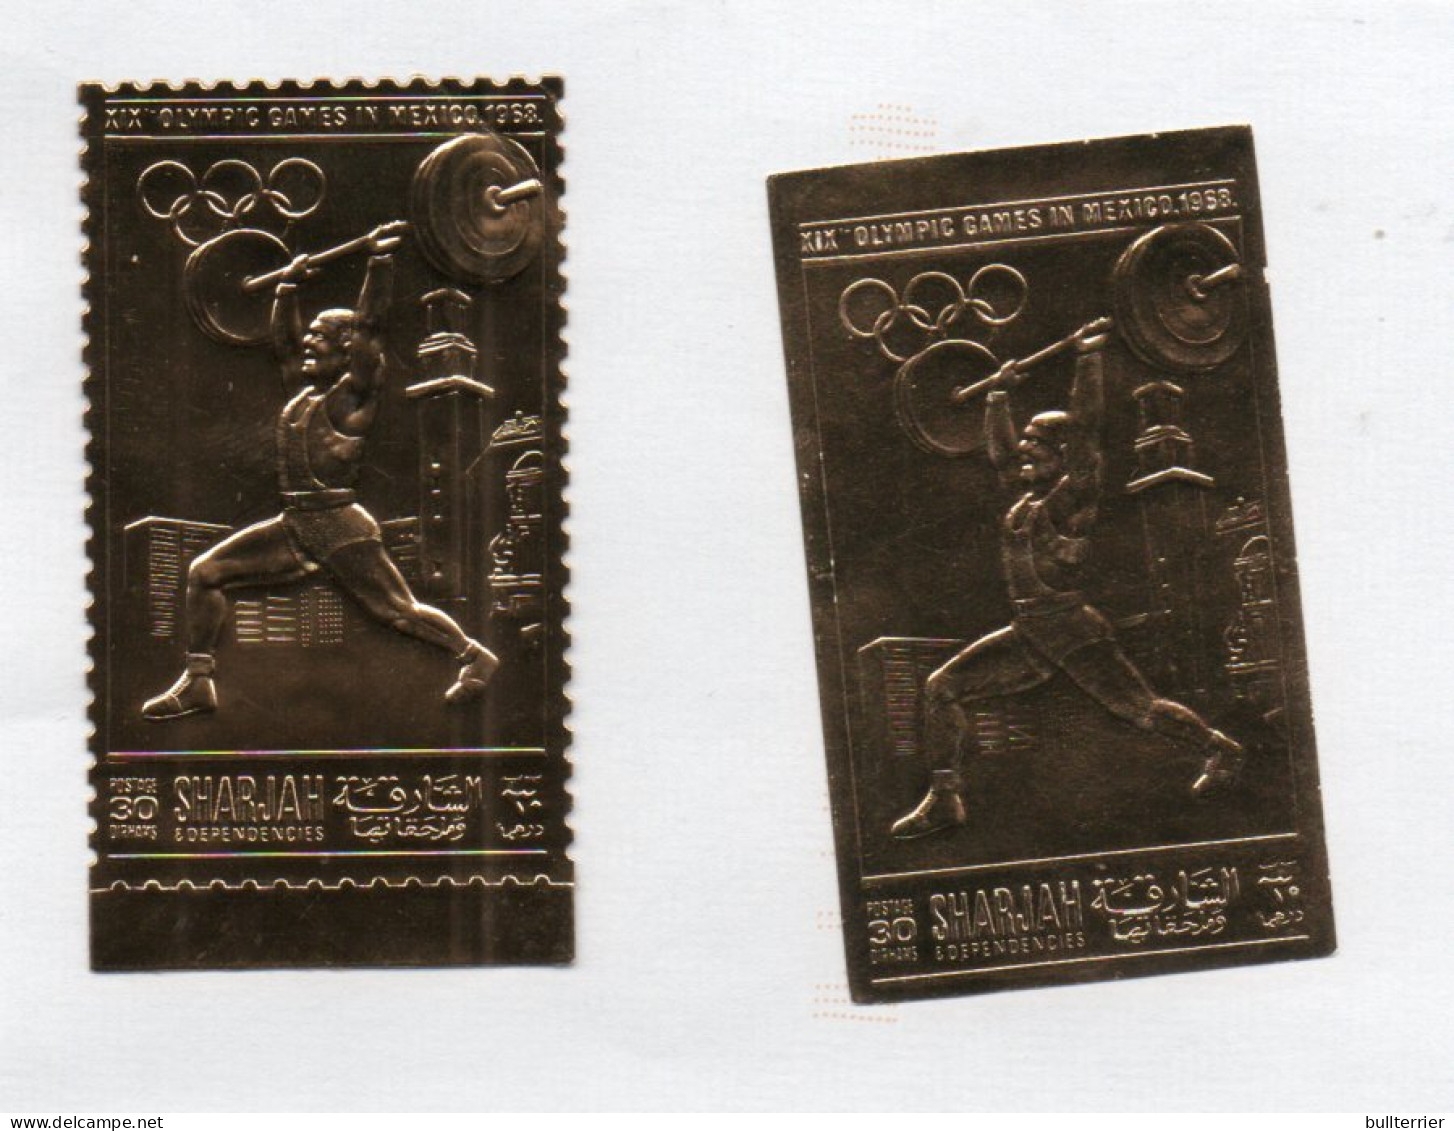 OLYMPICS - SHARJAH - 1968 -OLYMPICS / WEIGHTIFTING GOLD STAMP PERF & IMPERF MINT NEVER HINGED - Sommer 1968: Mexico